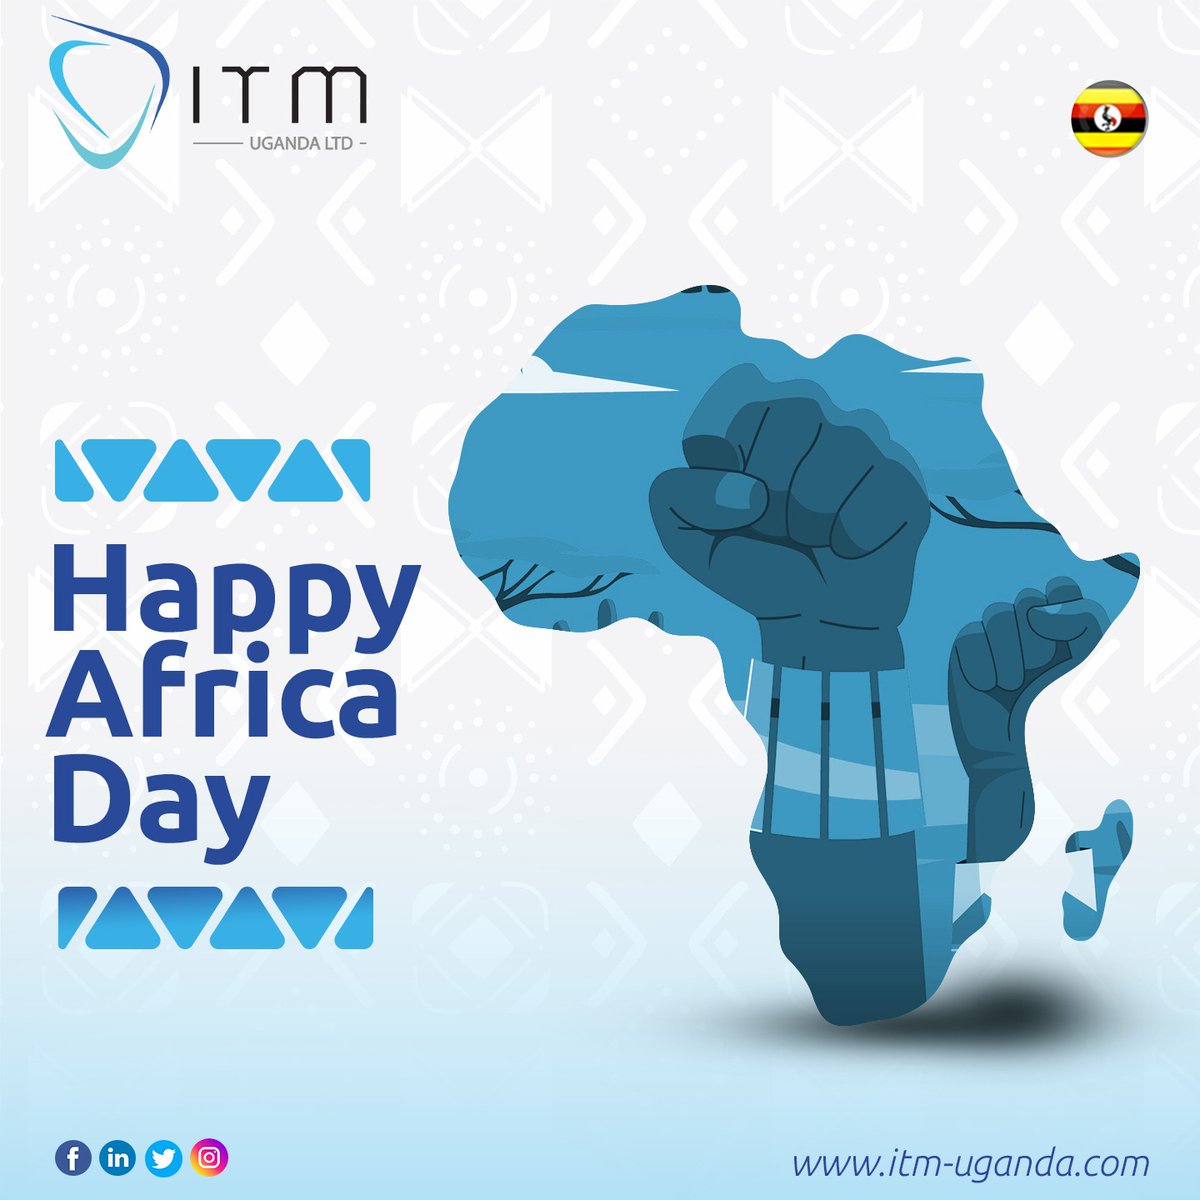 Celebrating the Richness, Unity, and Vibrancy of Africa.
Happy African Day!!
#AfricanDay
#WeAreITM